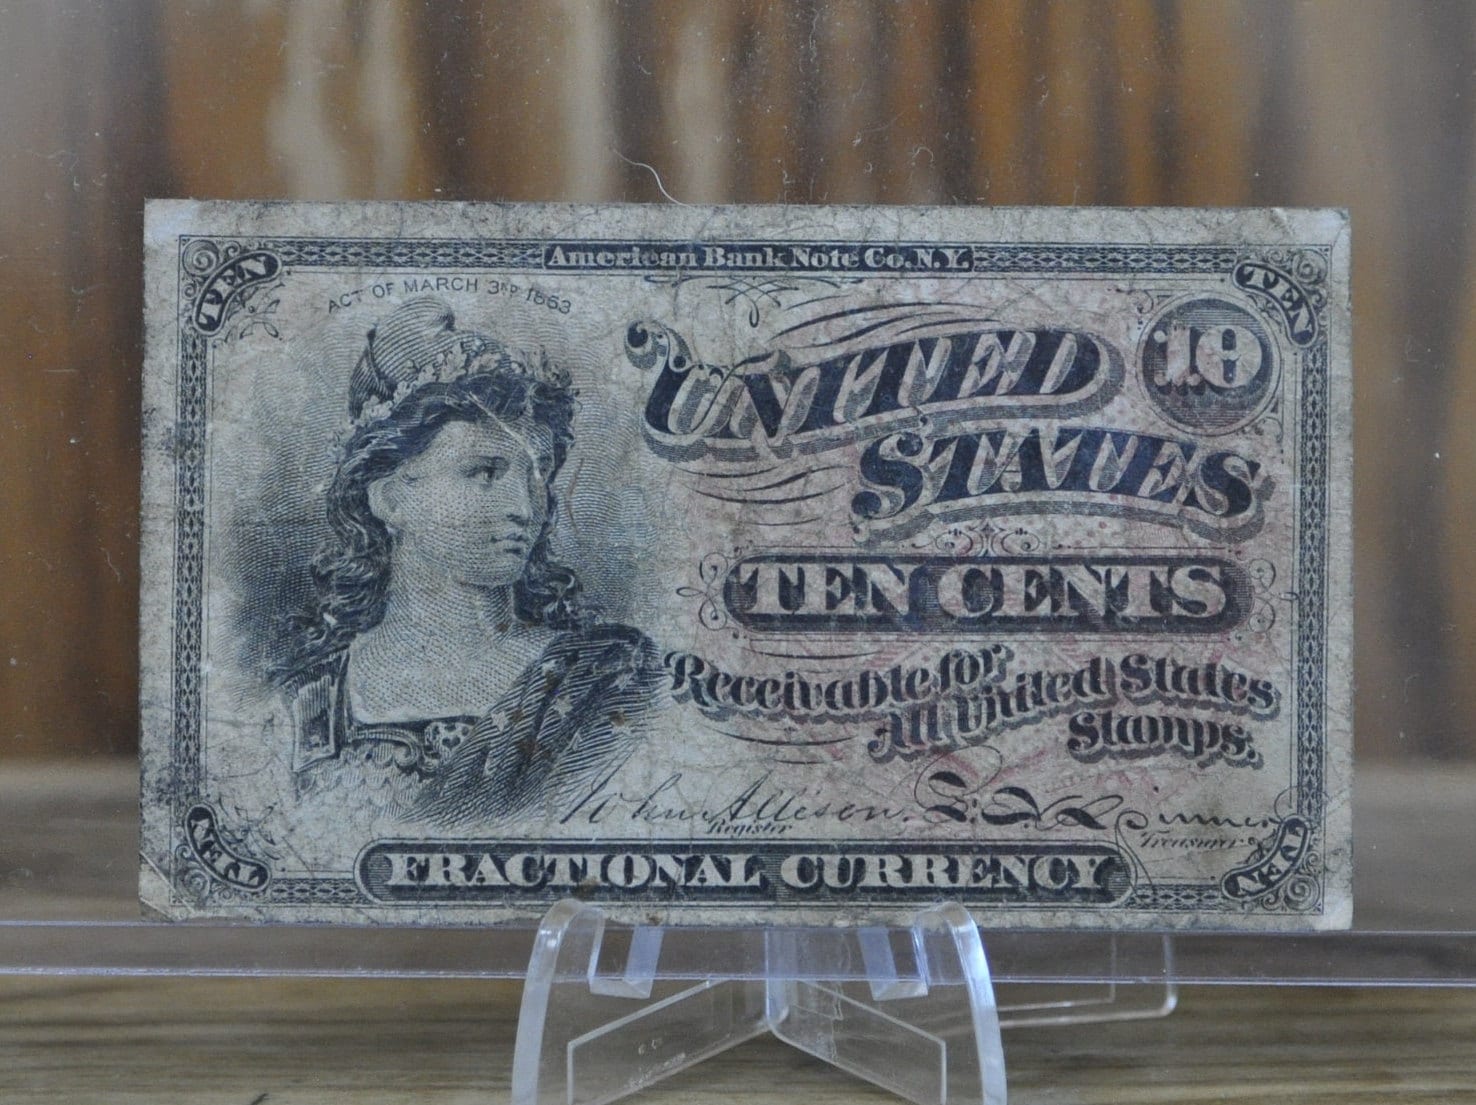 Authentic 1863 10 Cent Fractional Currency / 1863 Fractional Currency - F (Fine) Grade / Condition - 2nd Issue Fractional Note Fr1257